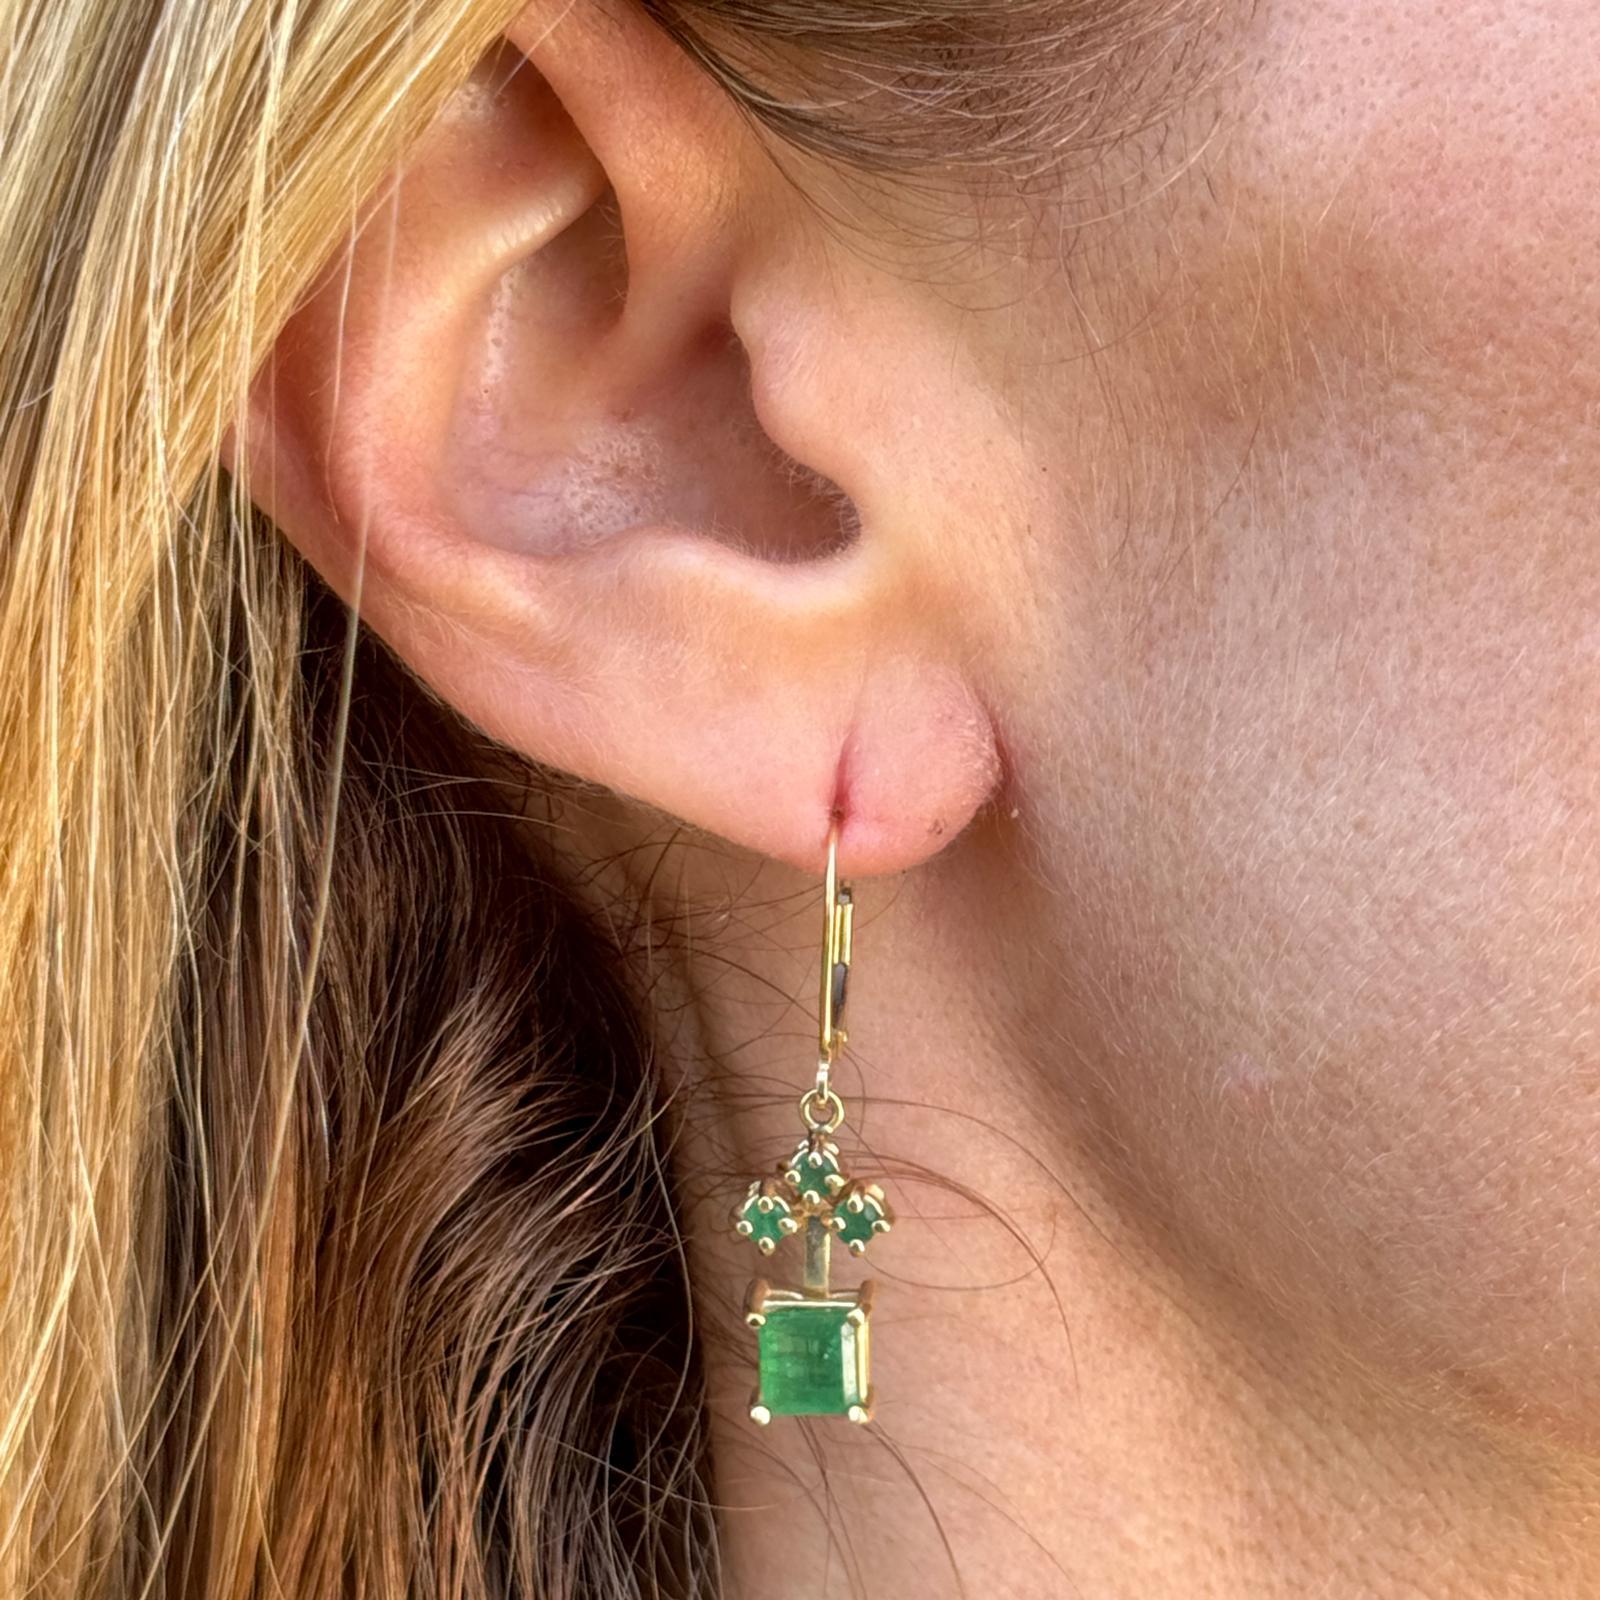 Emerald diamond drop earrings crafted in 14 karat yellow gold. The earrings feature 2 square cut natural emerald gemstones weighing approximately 1.40 CTW and 6 round emeralds weighing another .60 CTW. The earrings measure 1.30 inches in length,